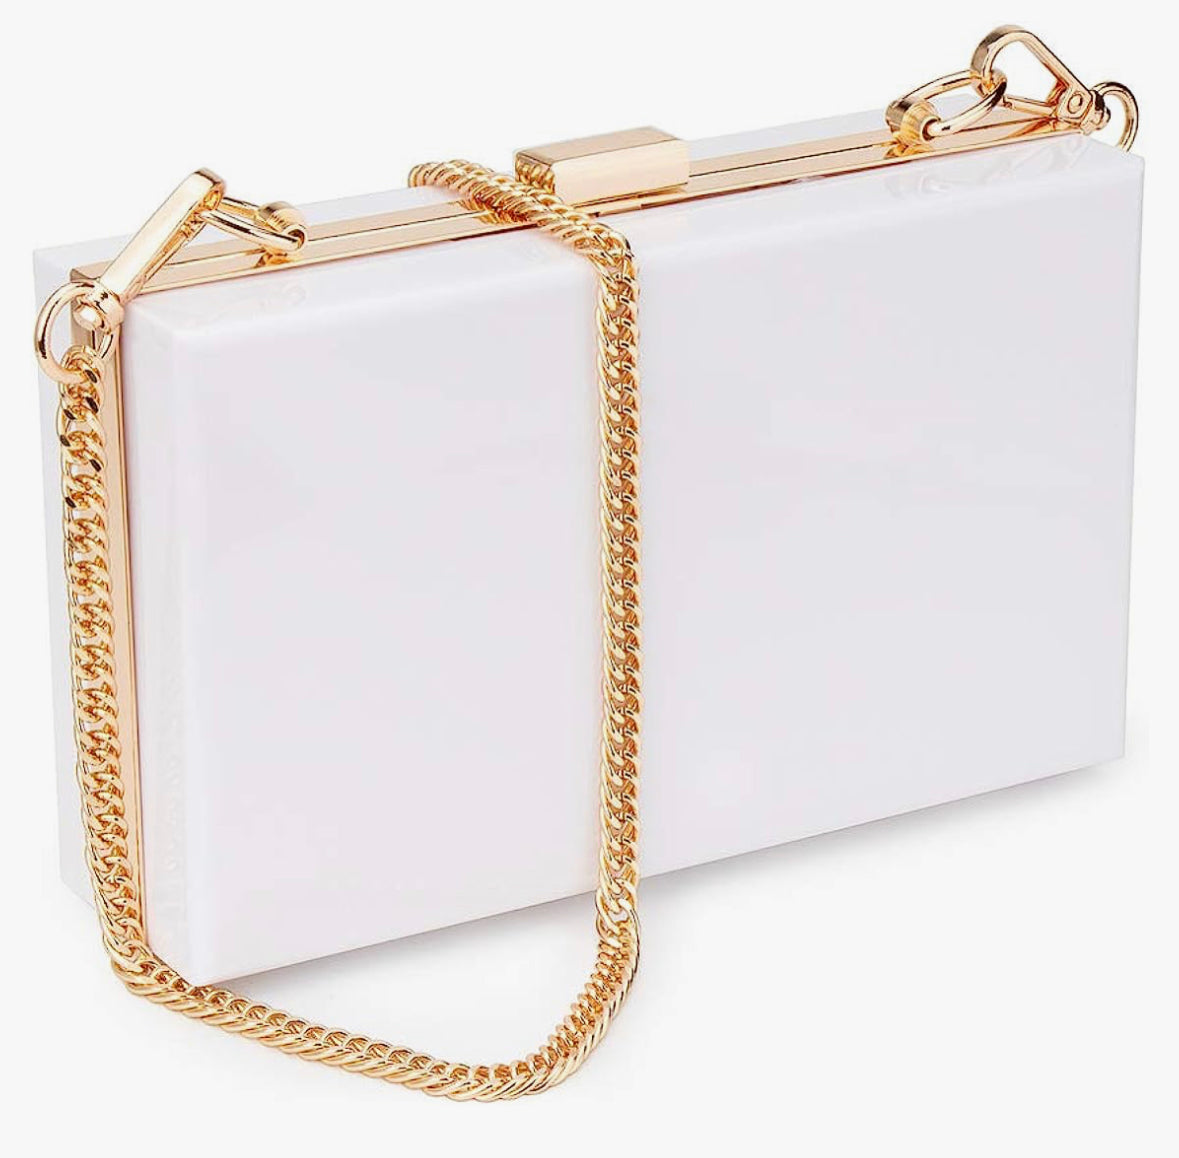 DST Acrylic Clutch Purse Dual Image - Front & Back